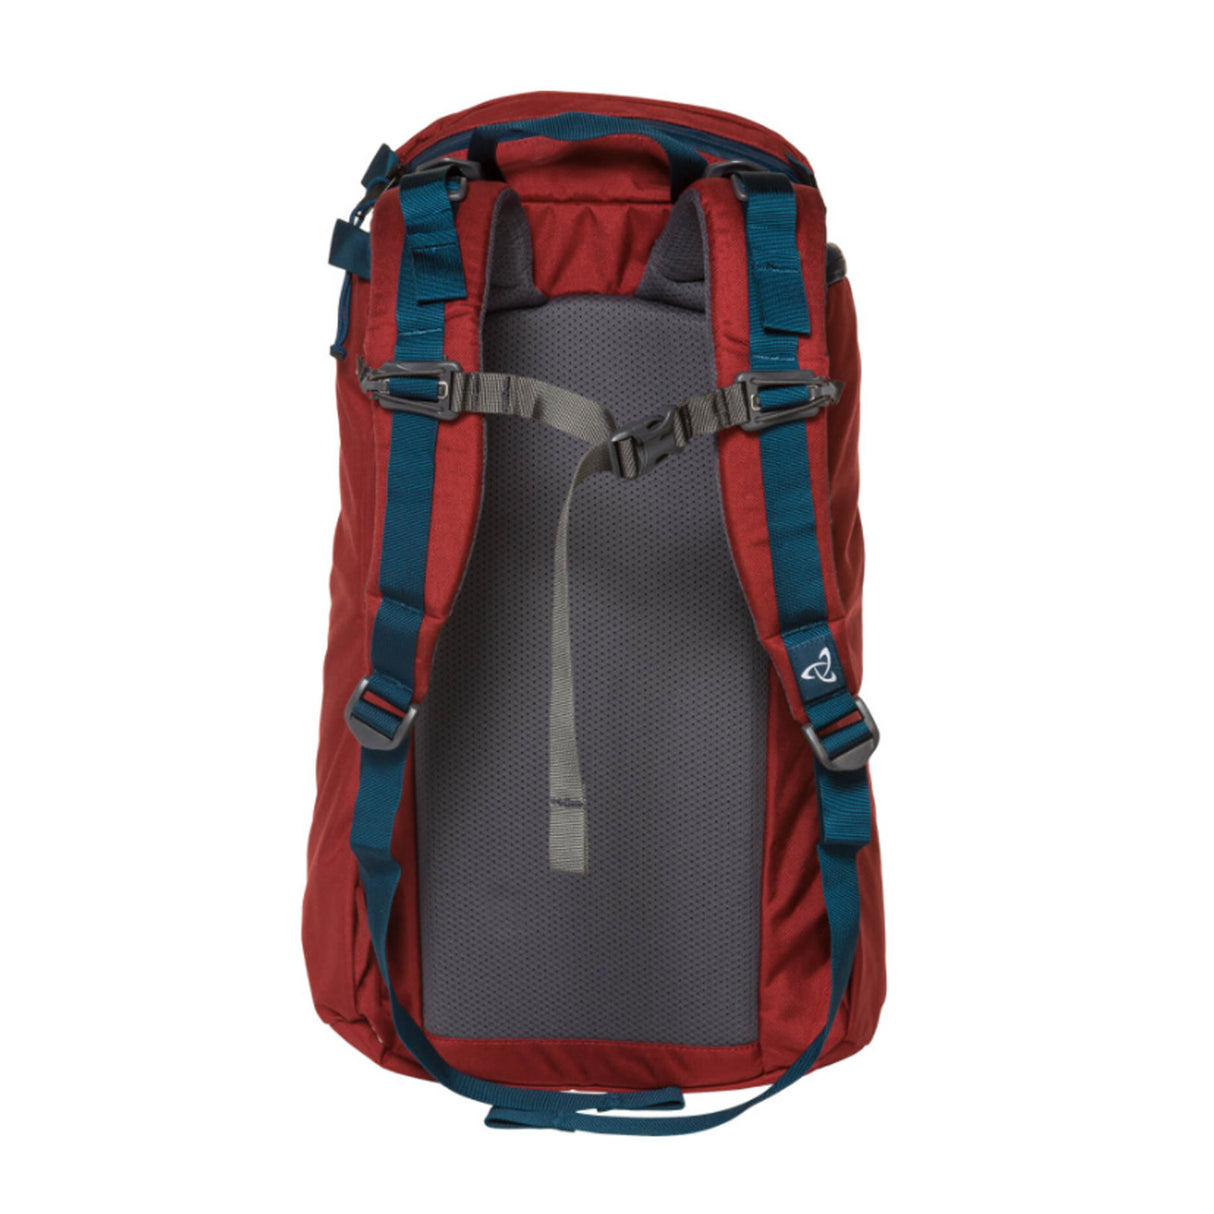 Mystery Ranch Urban Assault 21 Backpack - Garnet Accessories - Bags - Backpacks - The Heel Shoe Fitters